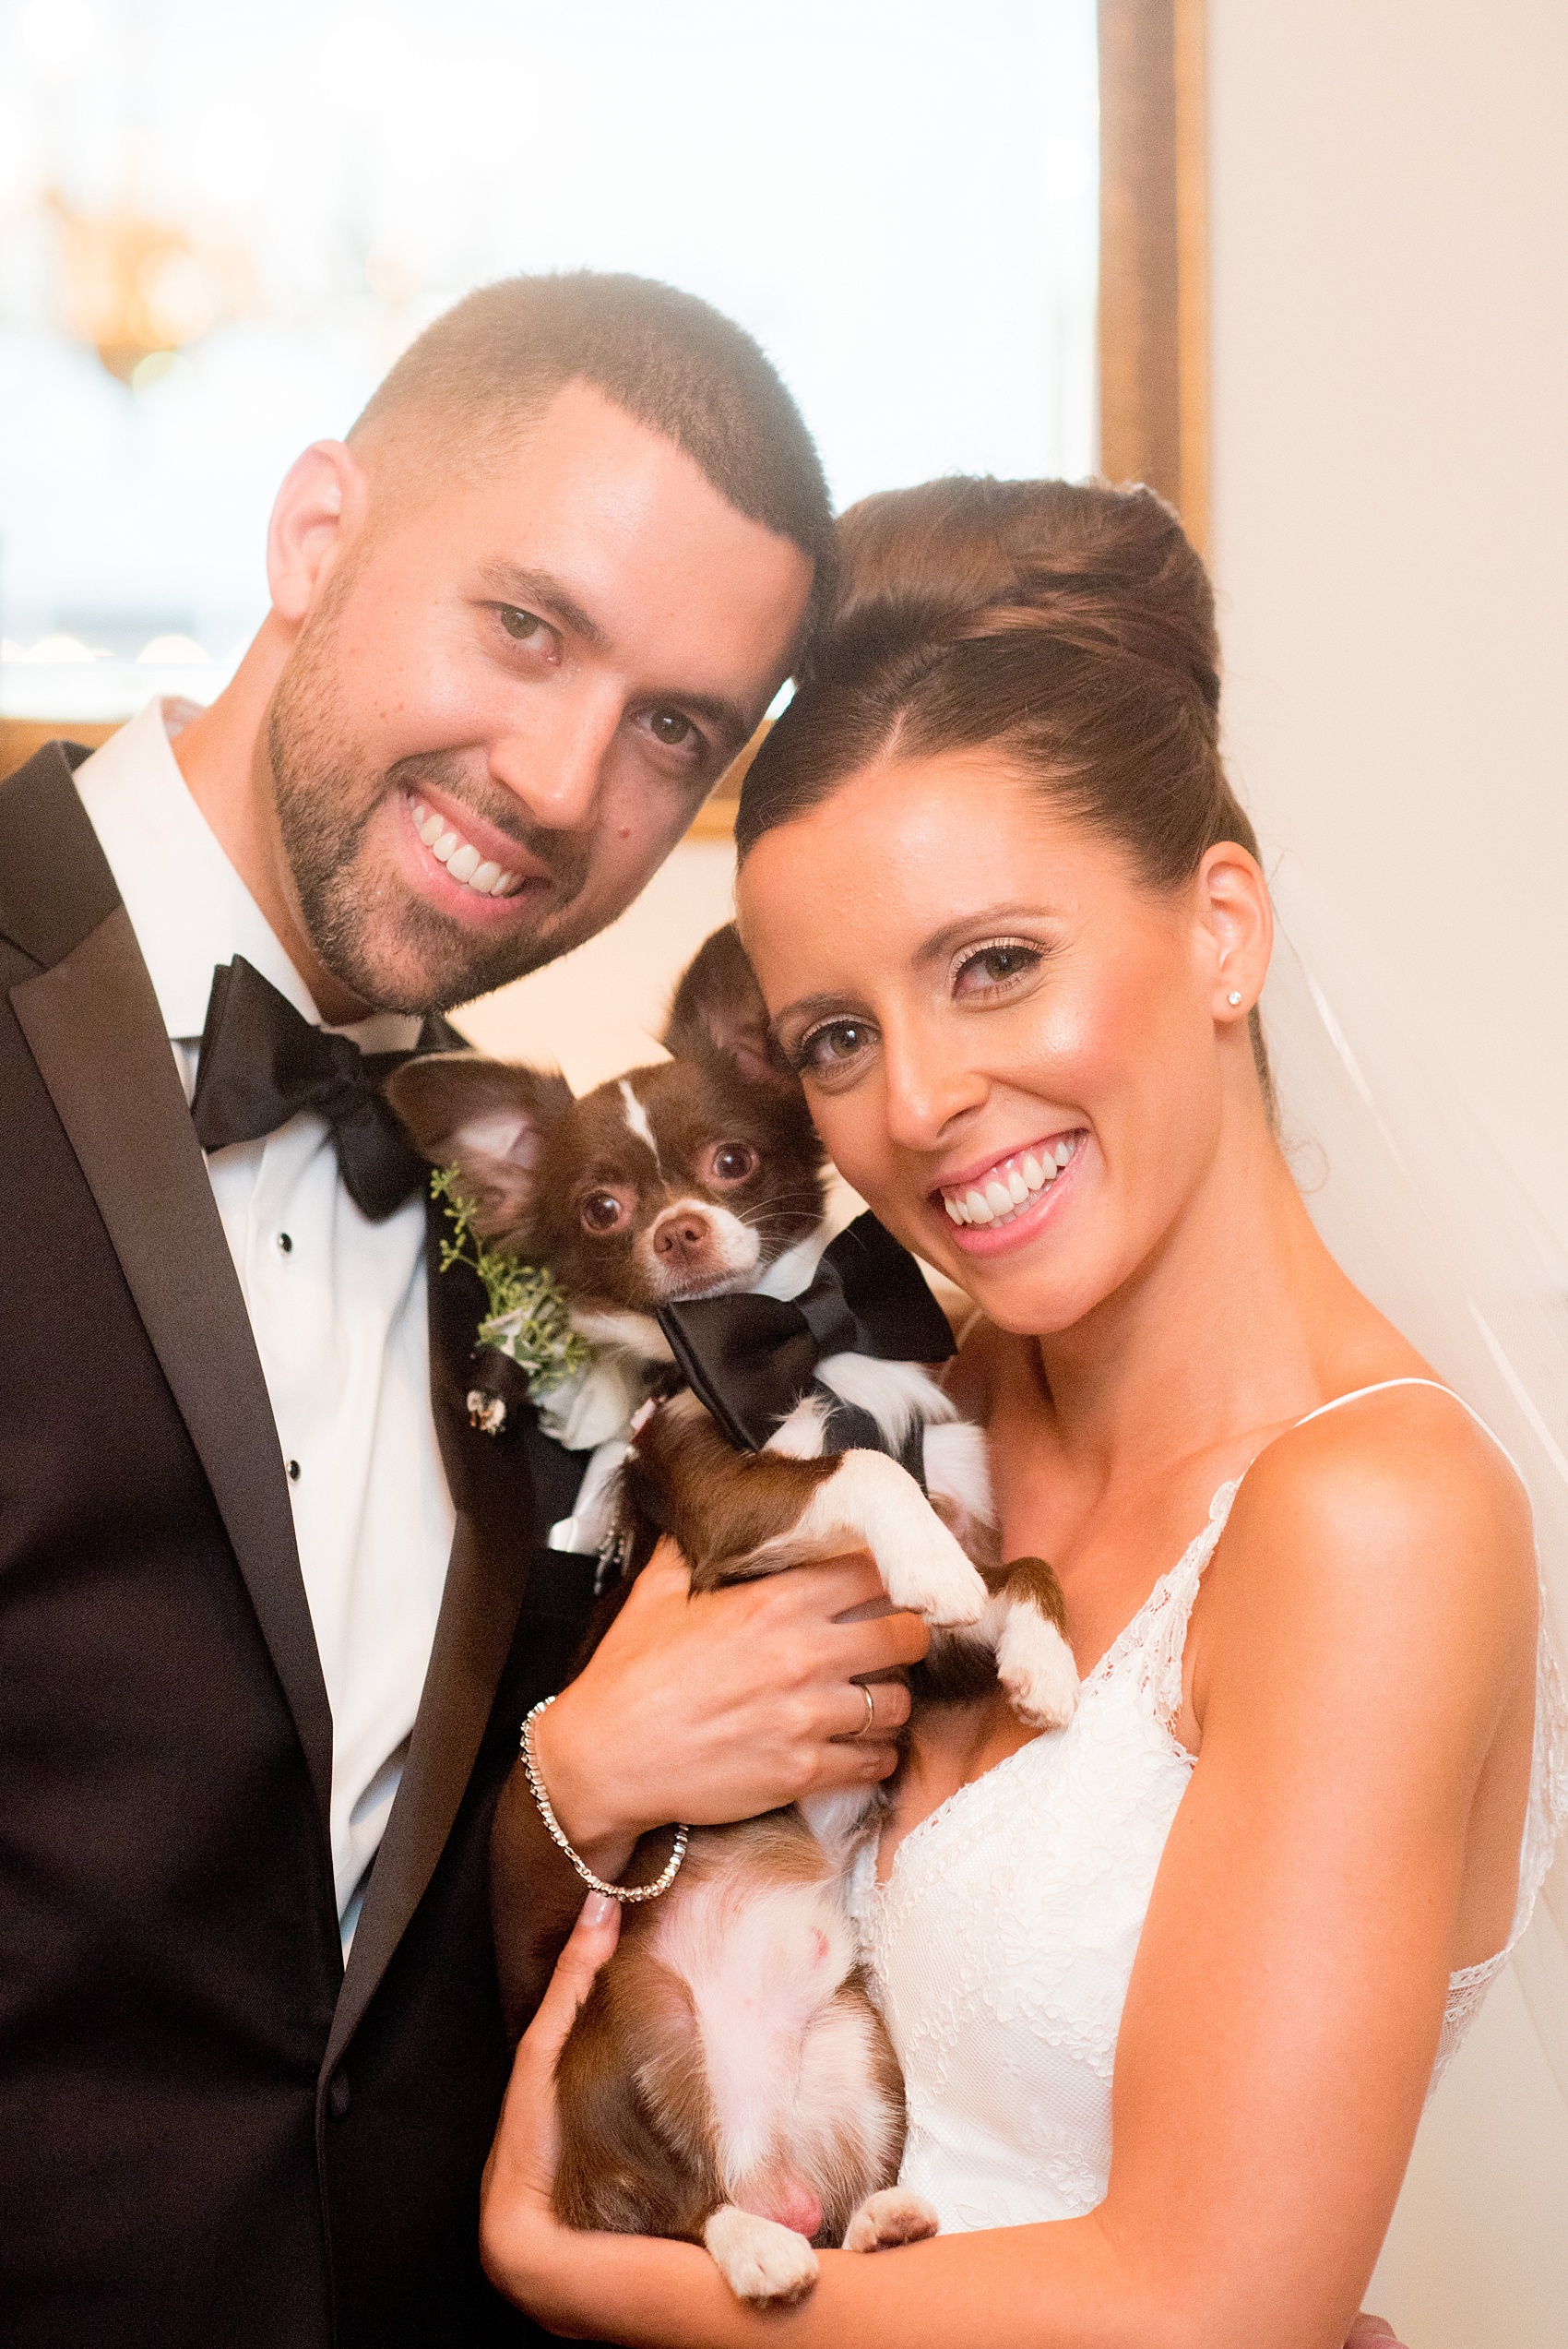 Mikkel Paige Photography photos of a luxury wedding in NYC. Image of the bride and groom's at India House in lower Manhattan with their dog in a bow tie.